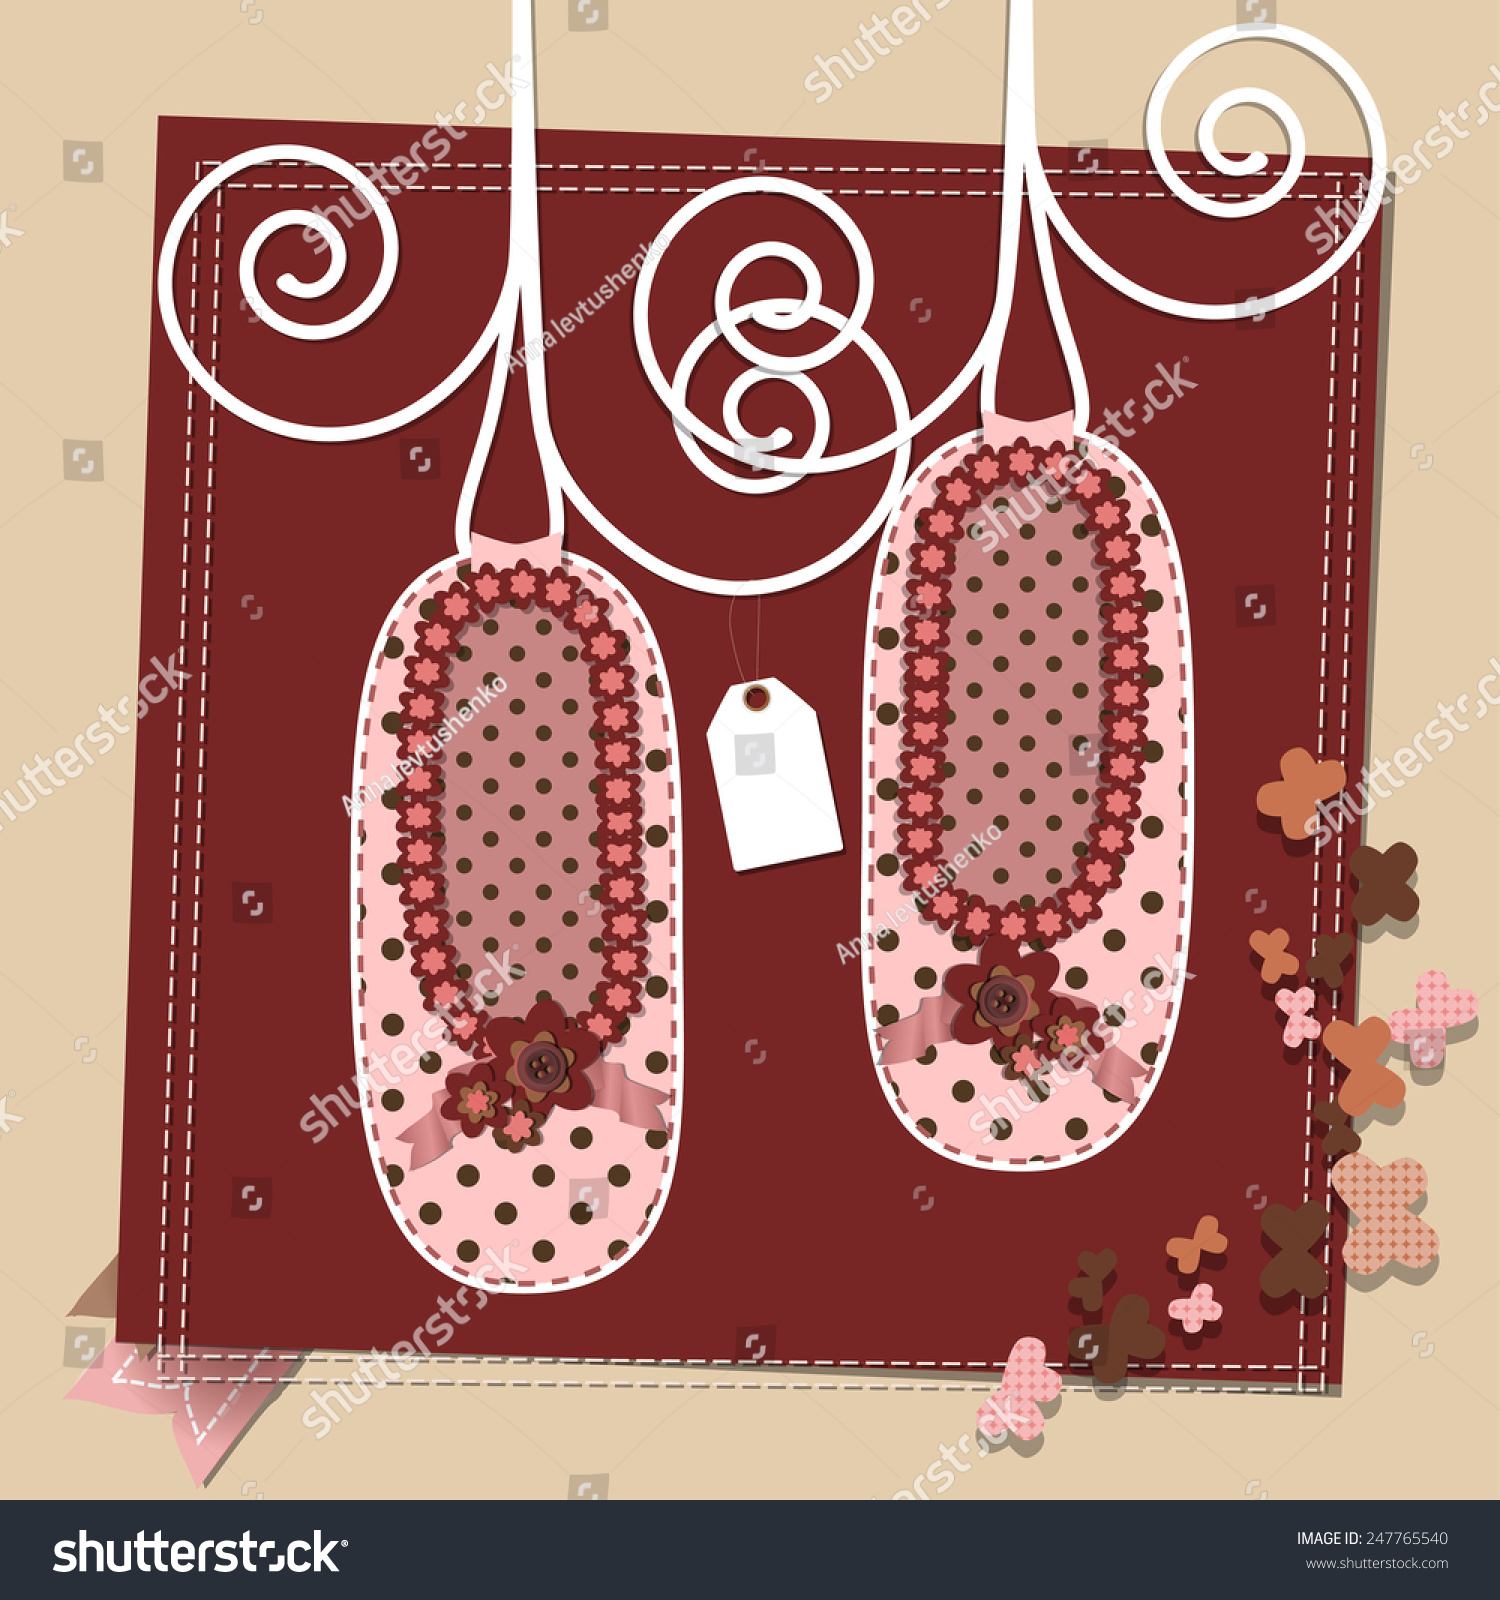 Funny Vintage Happy Birthday Baby Shower Stock Image Download Now